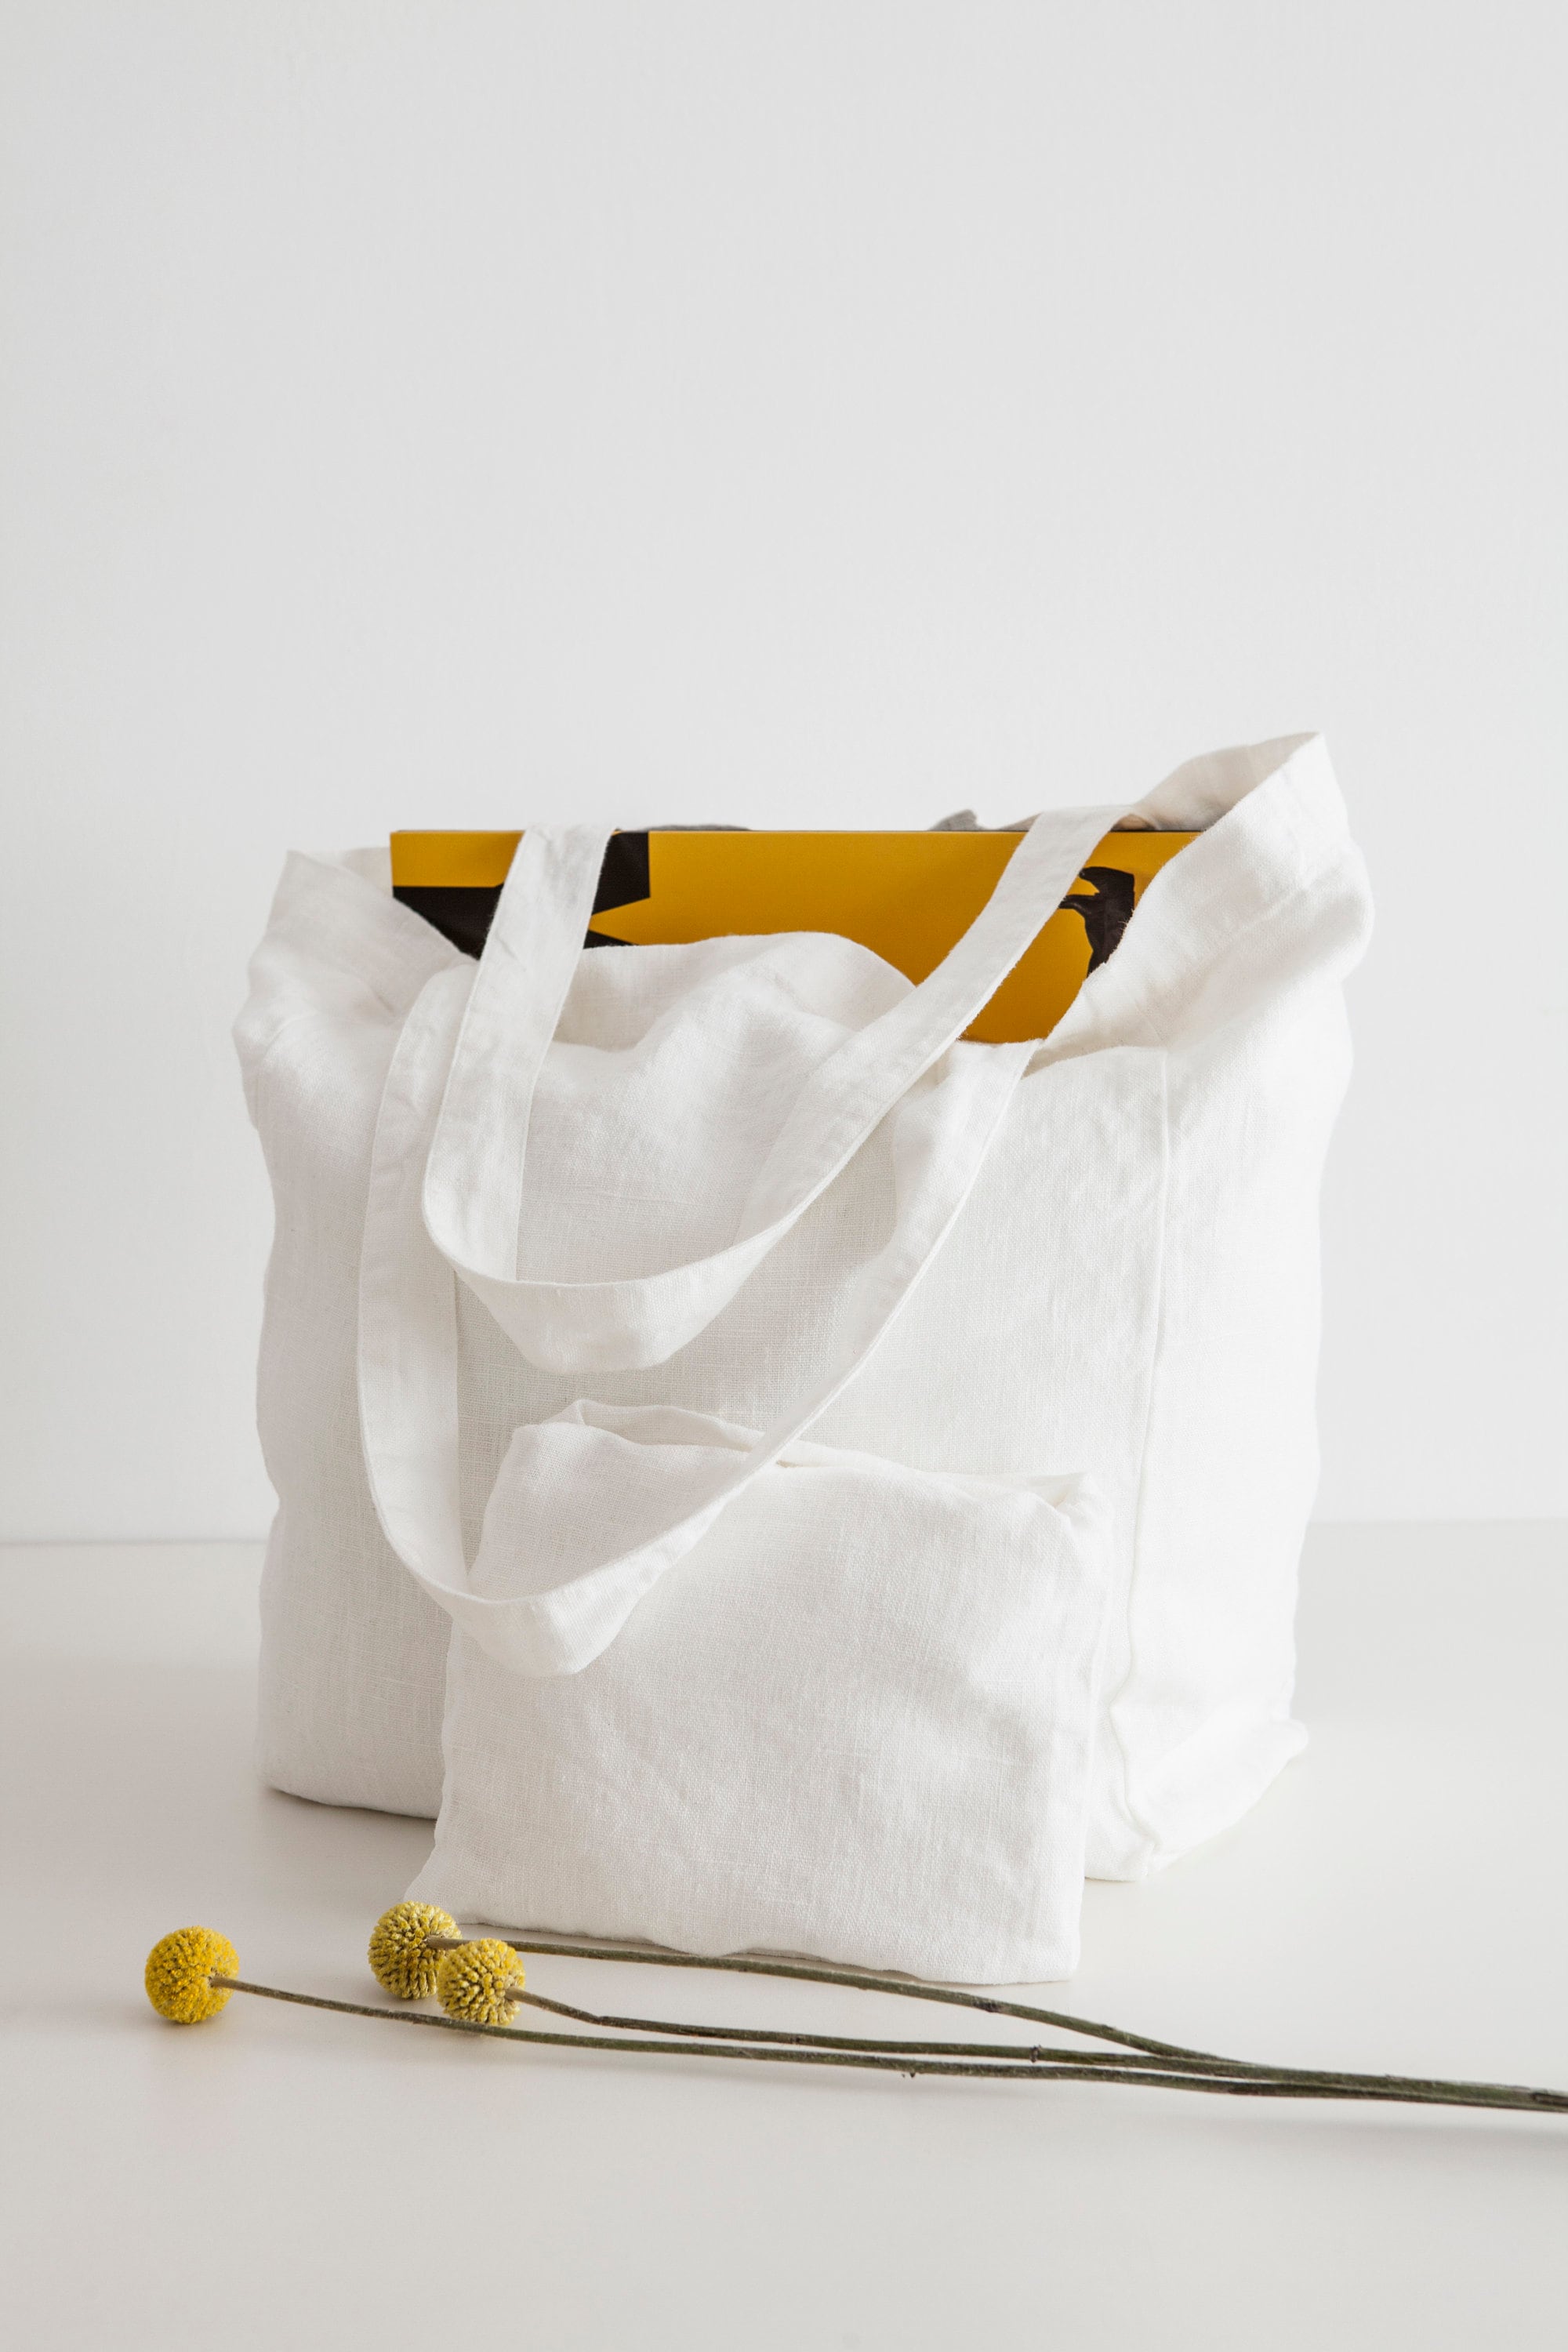 ORGANIC MADE STANDARD TOTE - OFF WHITE (S)